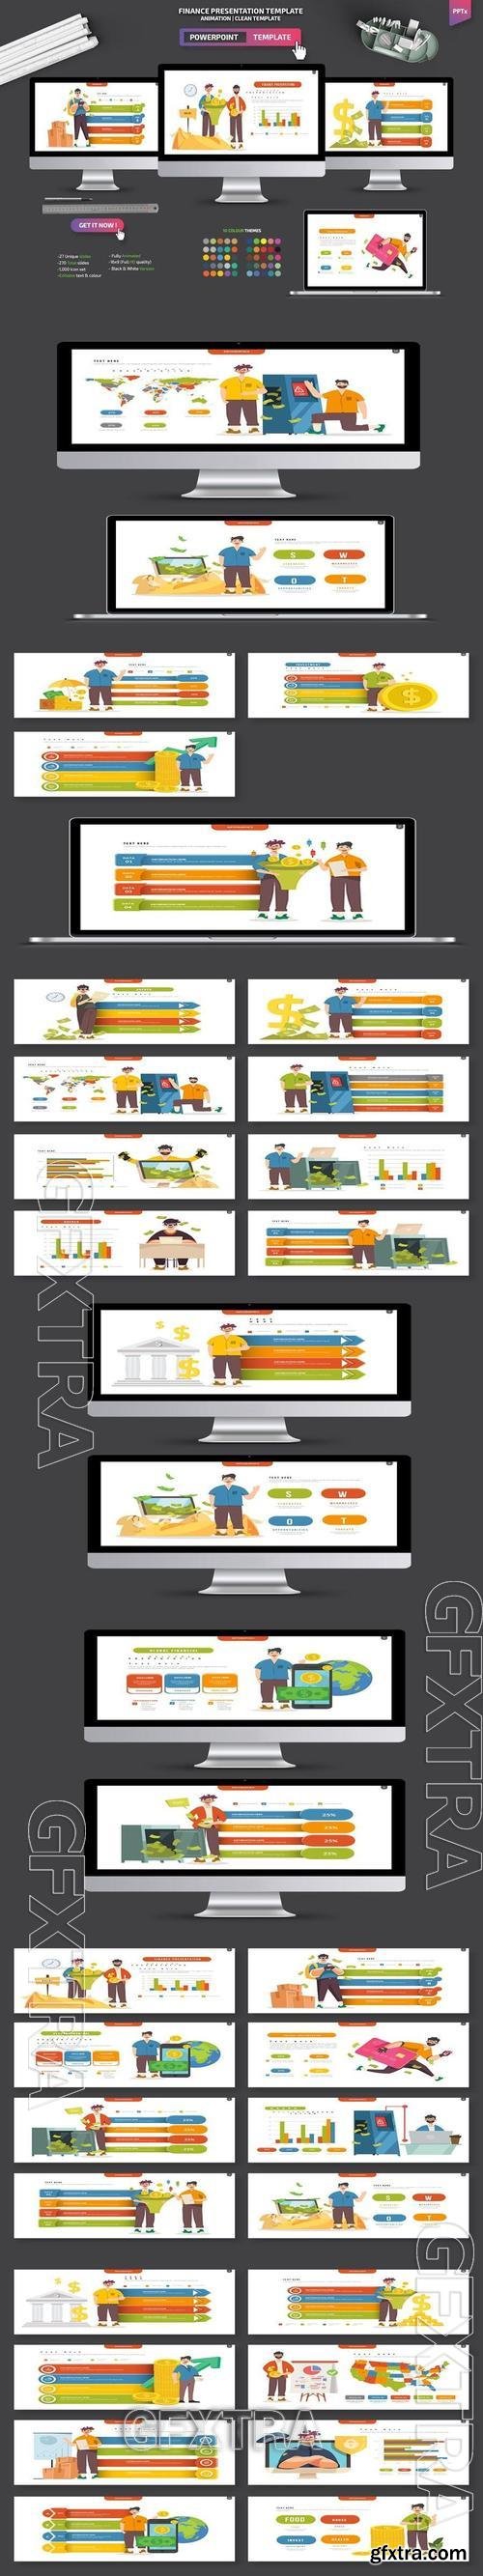 Finance Infographic Powerpoint Templates NXBTHJ3